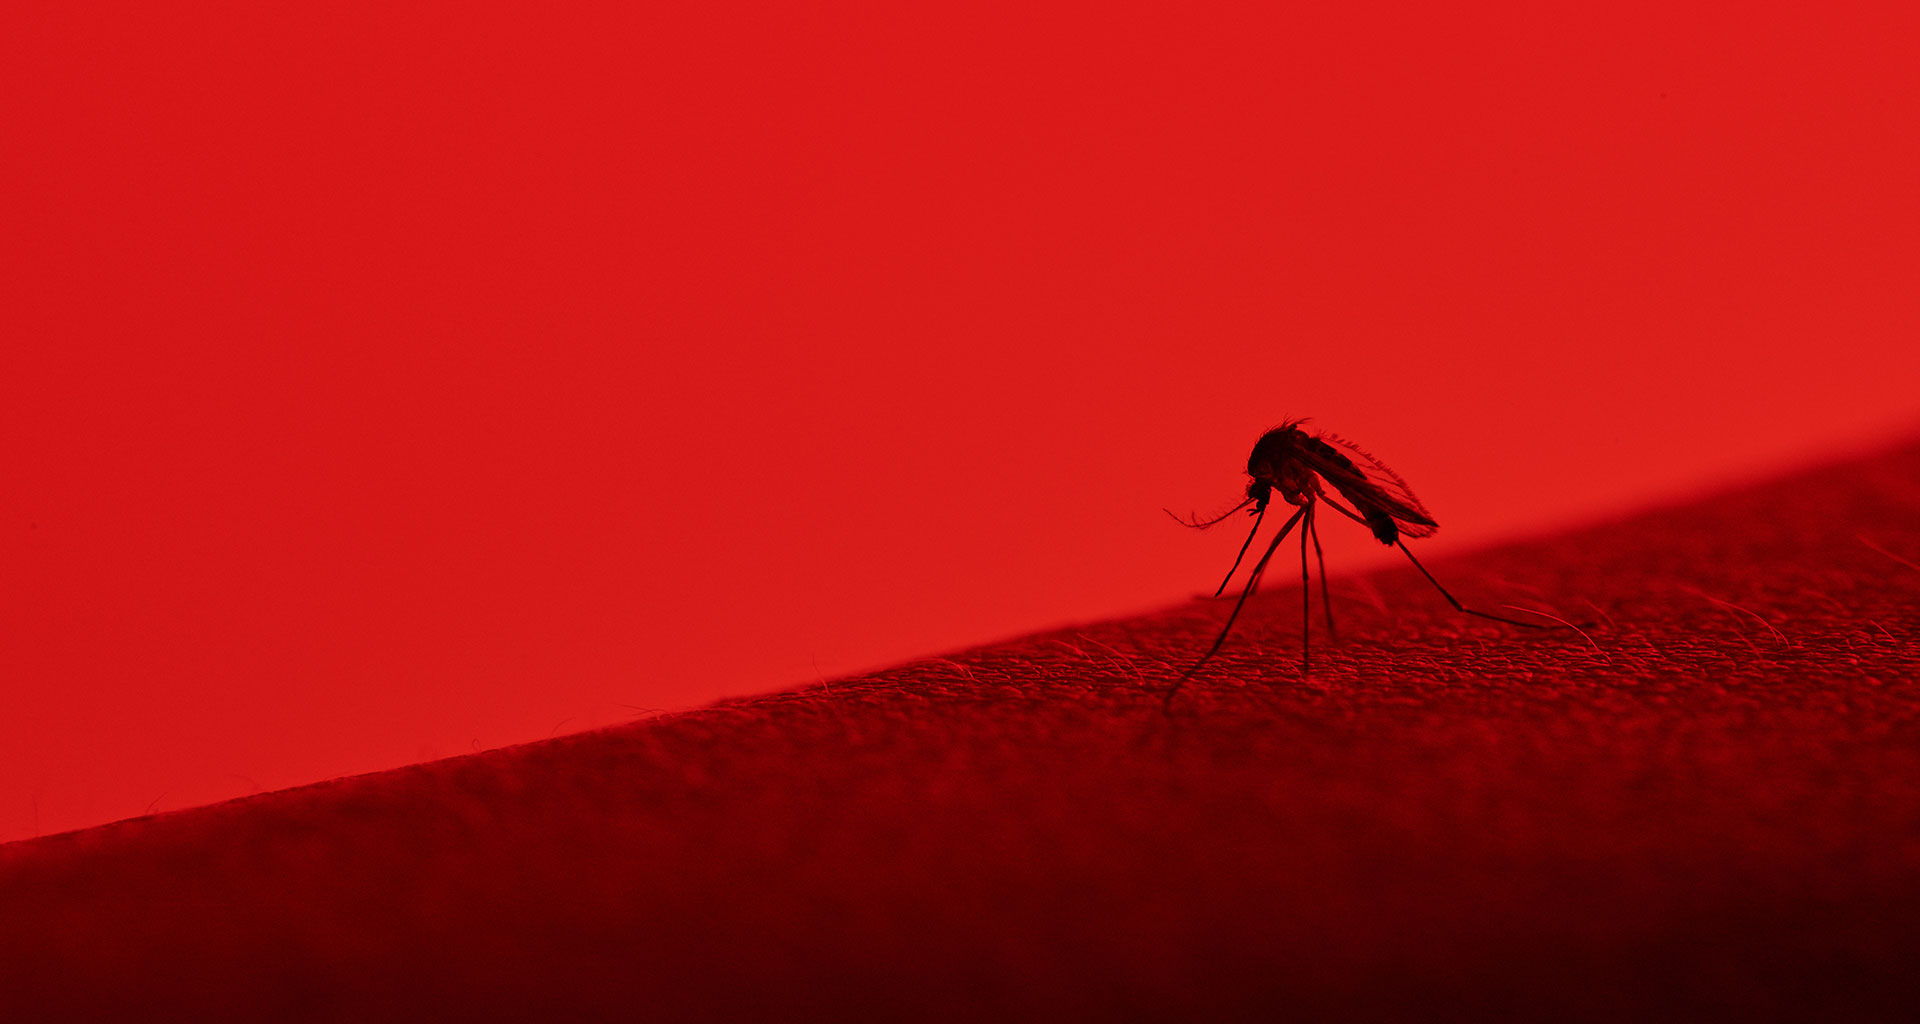 A mosquito on a red background 